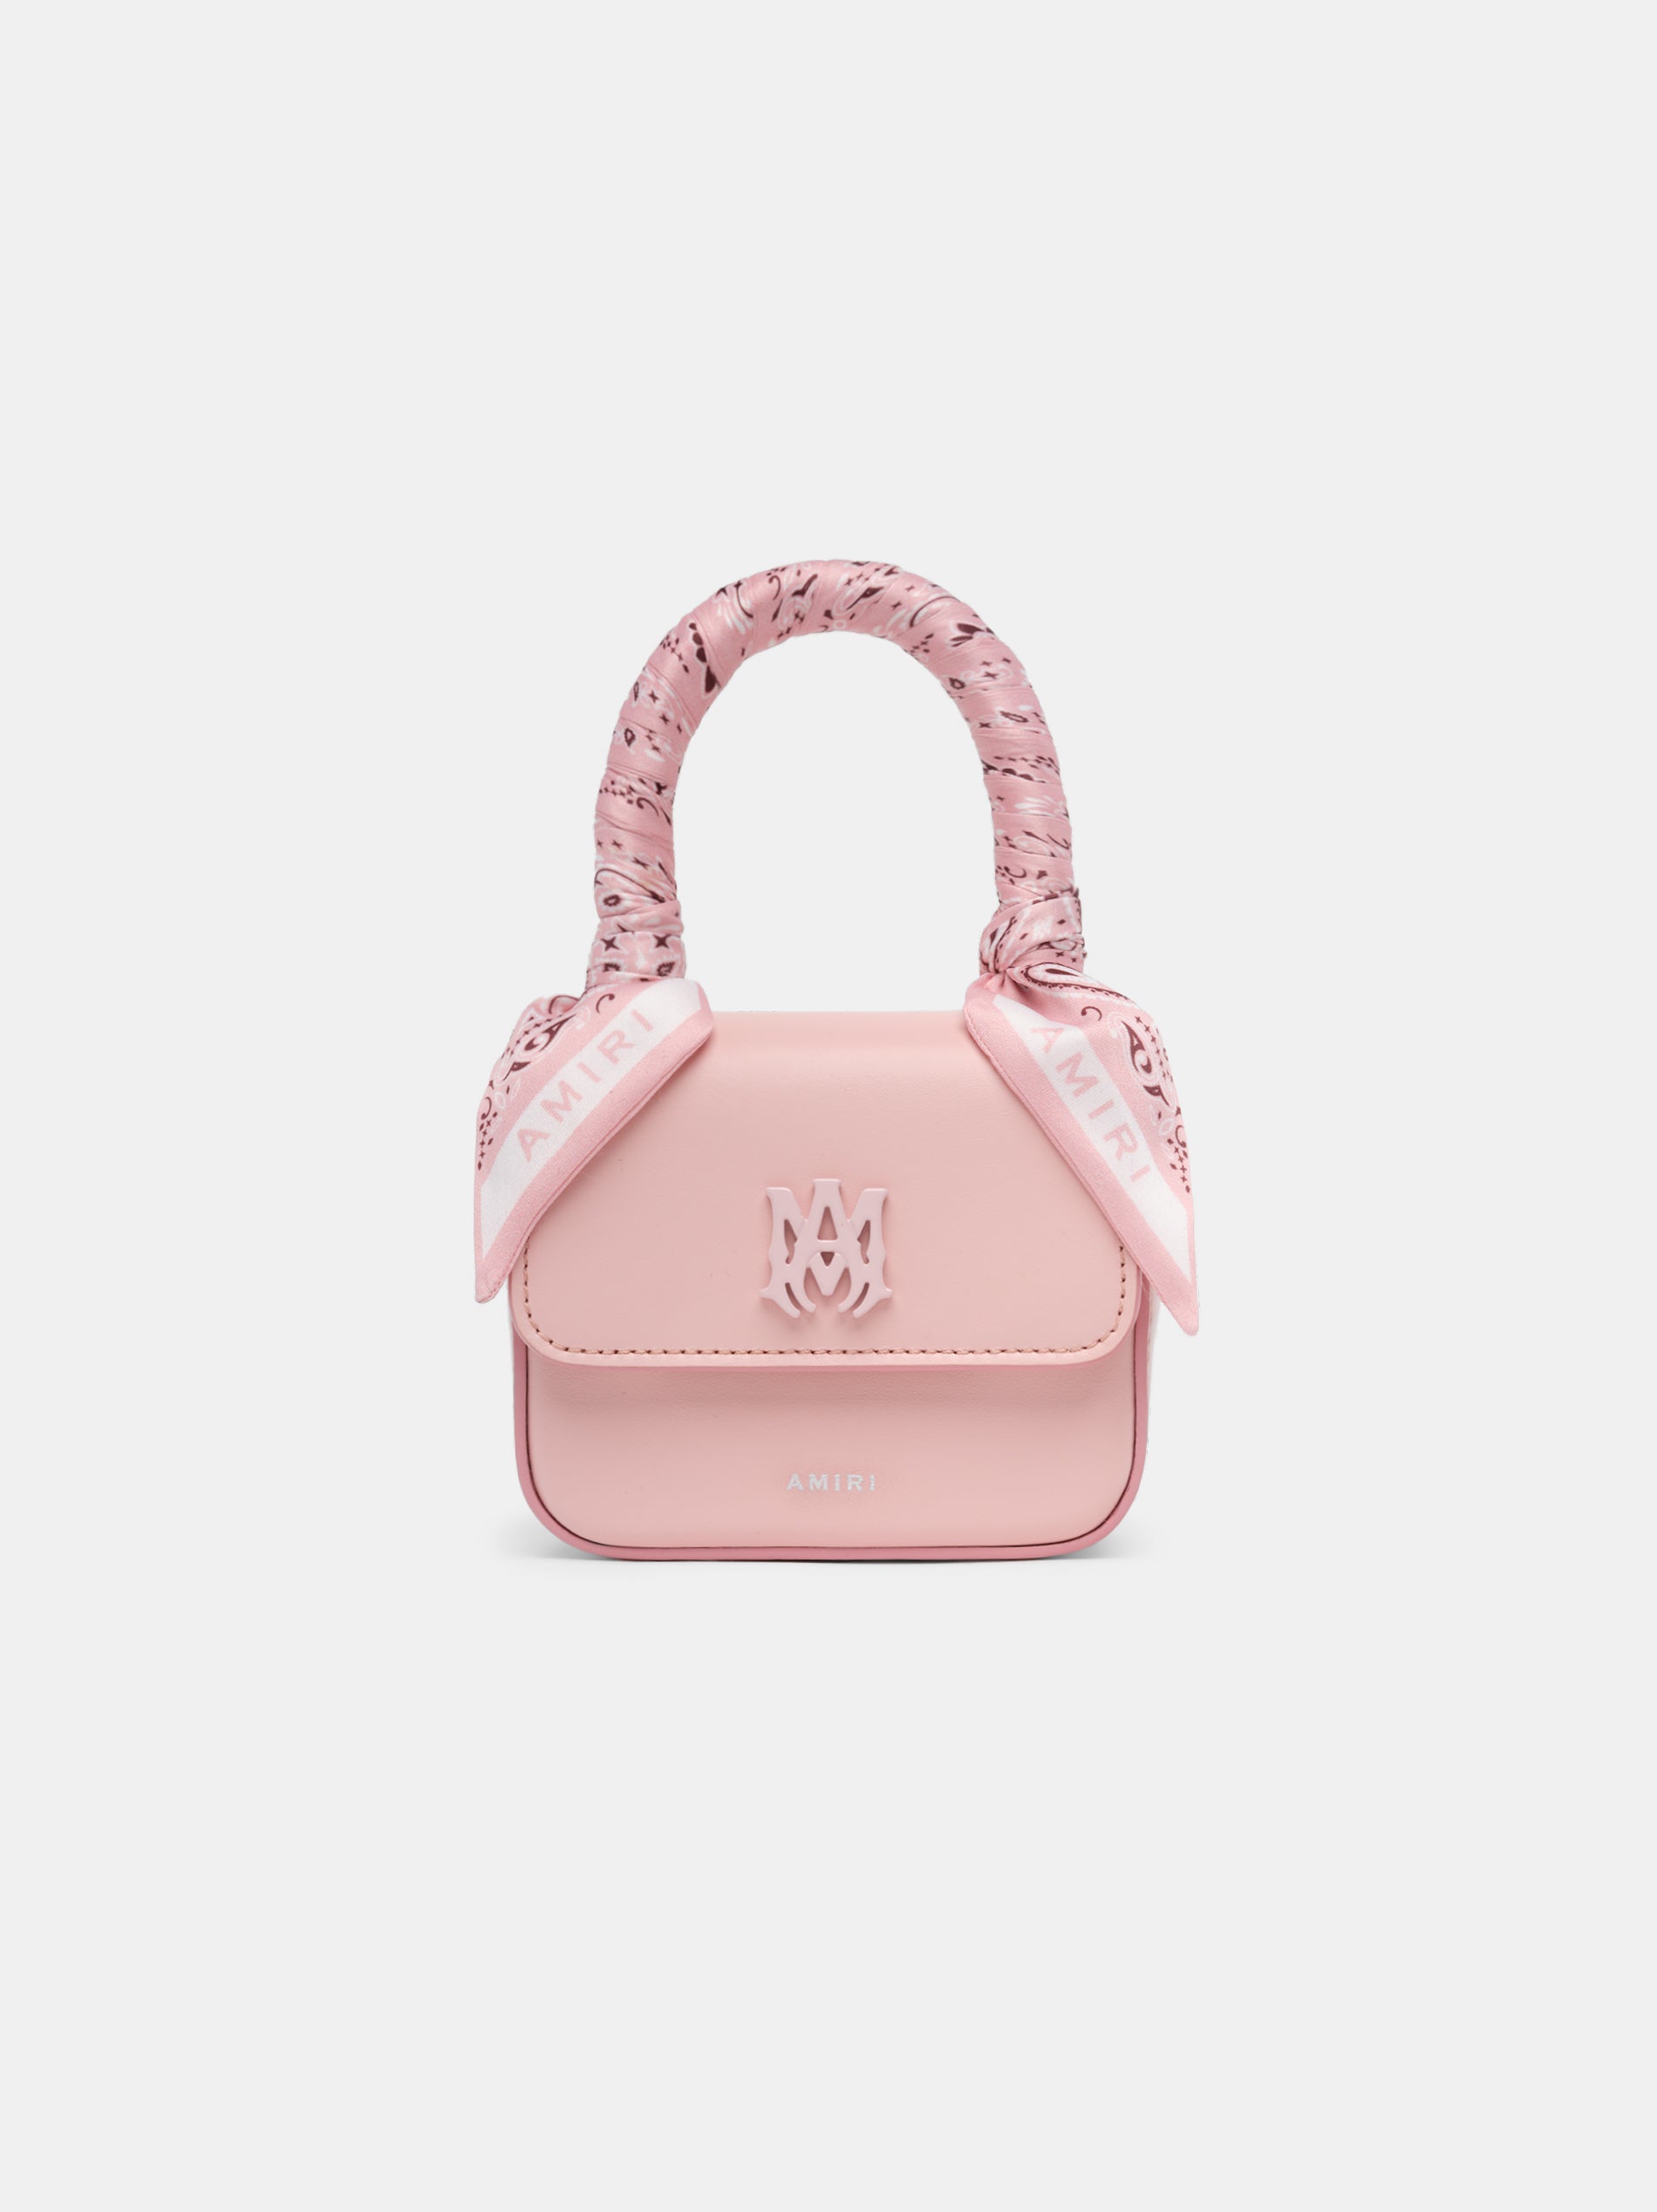 Product WOMEN - NANO MA BAG - Pink featured image